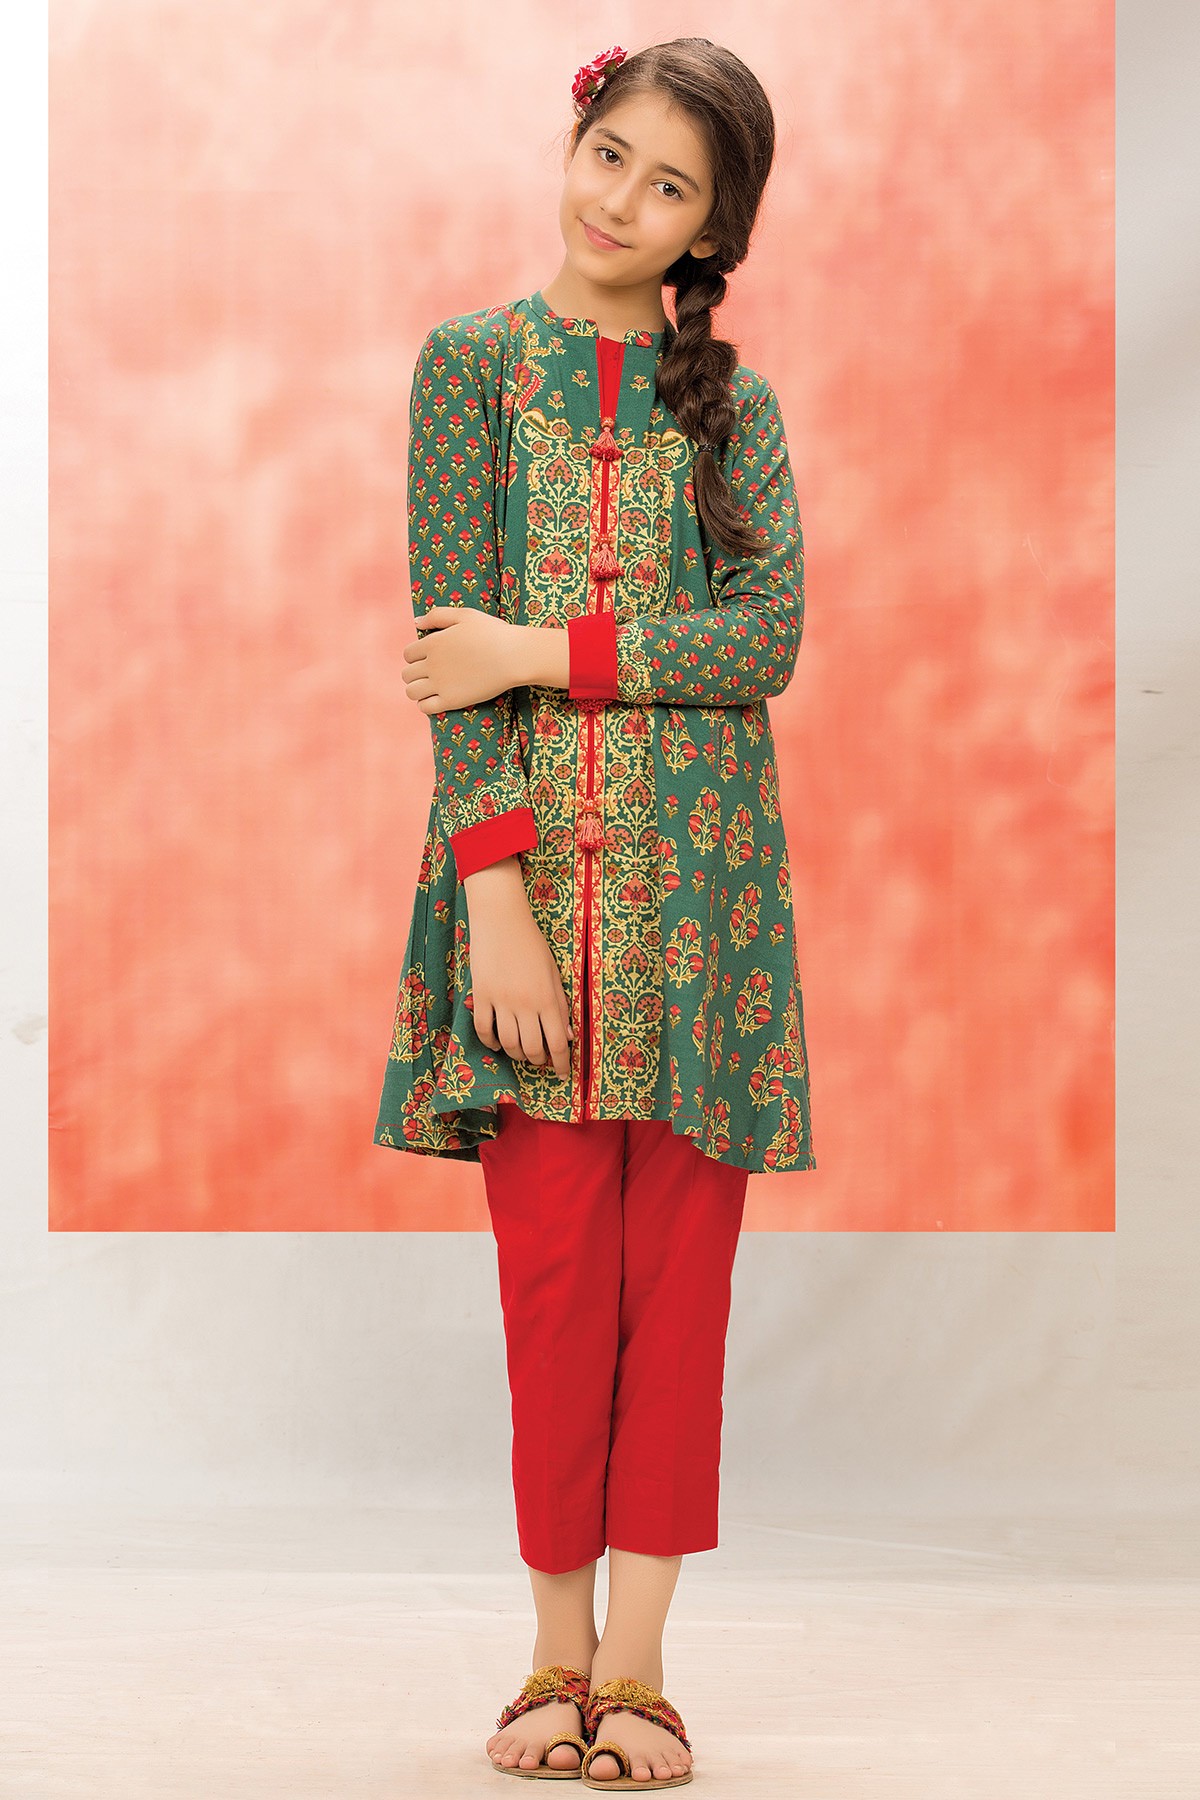 New Eid Dresses Style collection For Kids